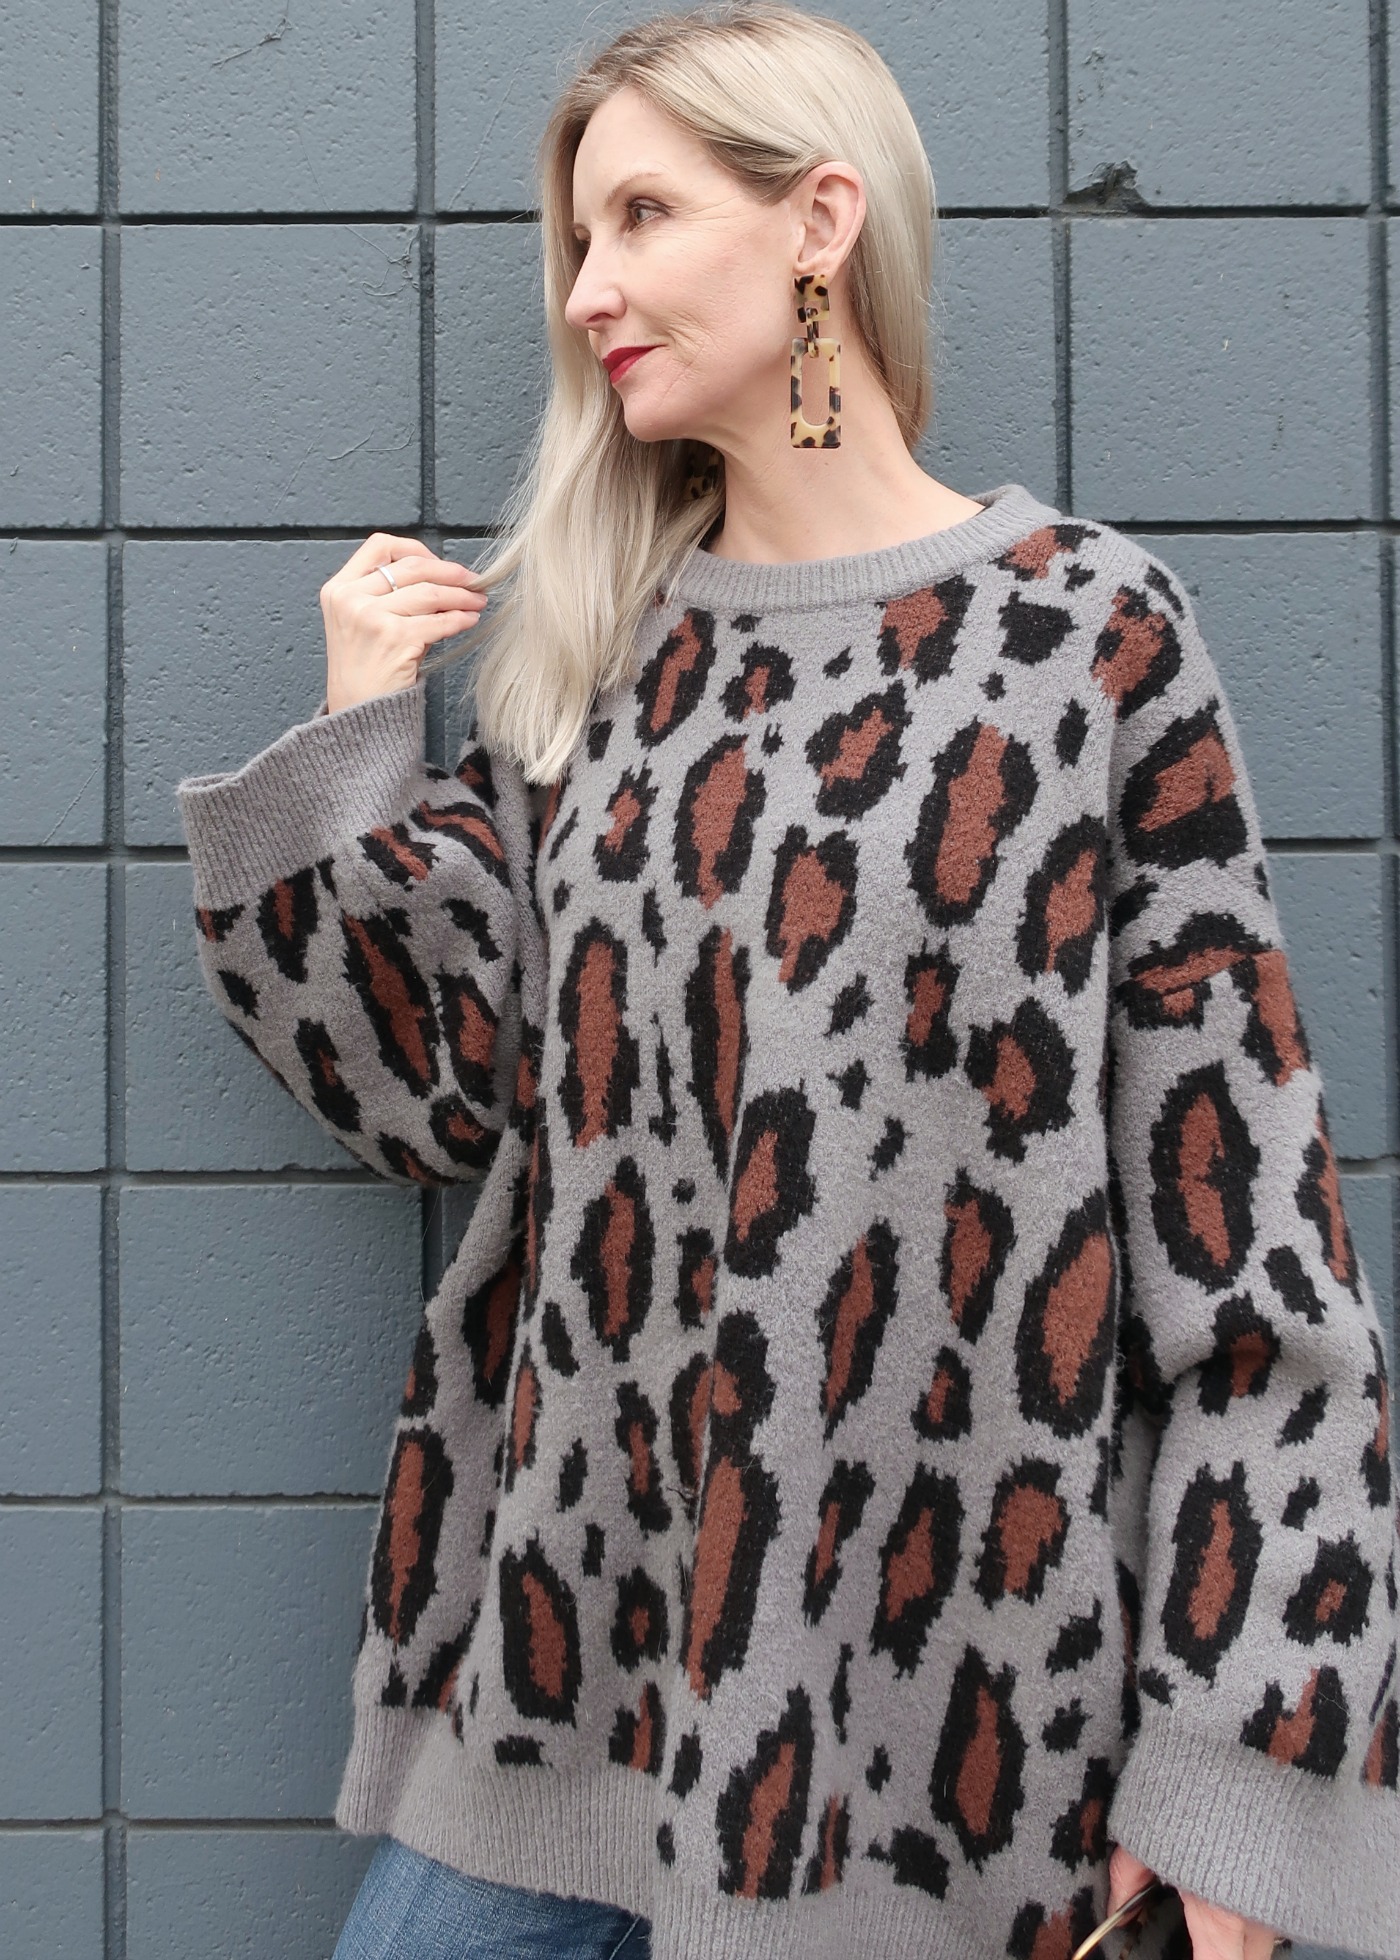 leopard sweater and tortoise earrings make this look pop